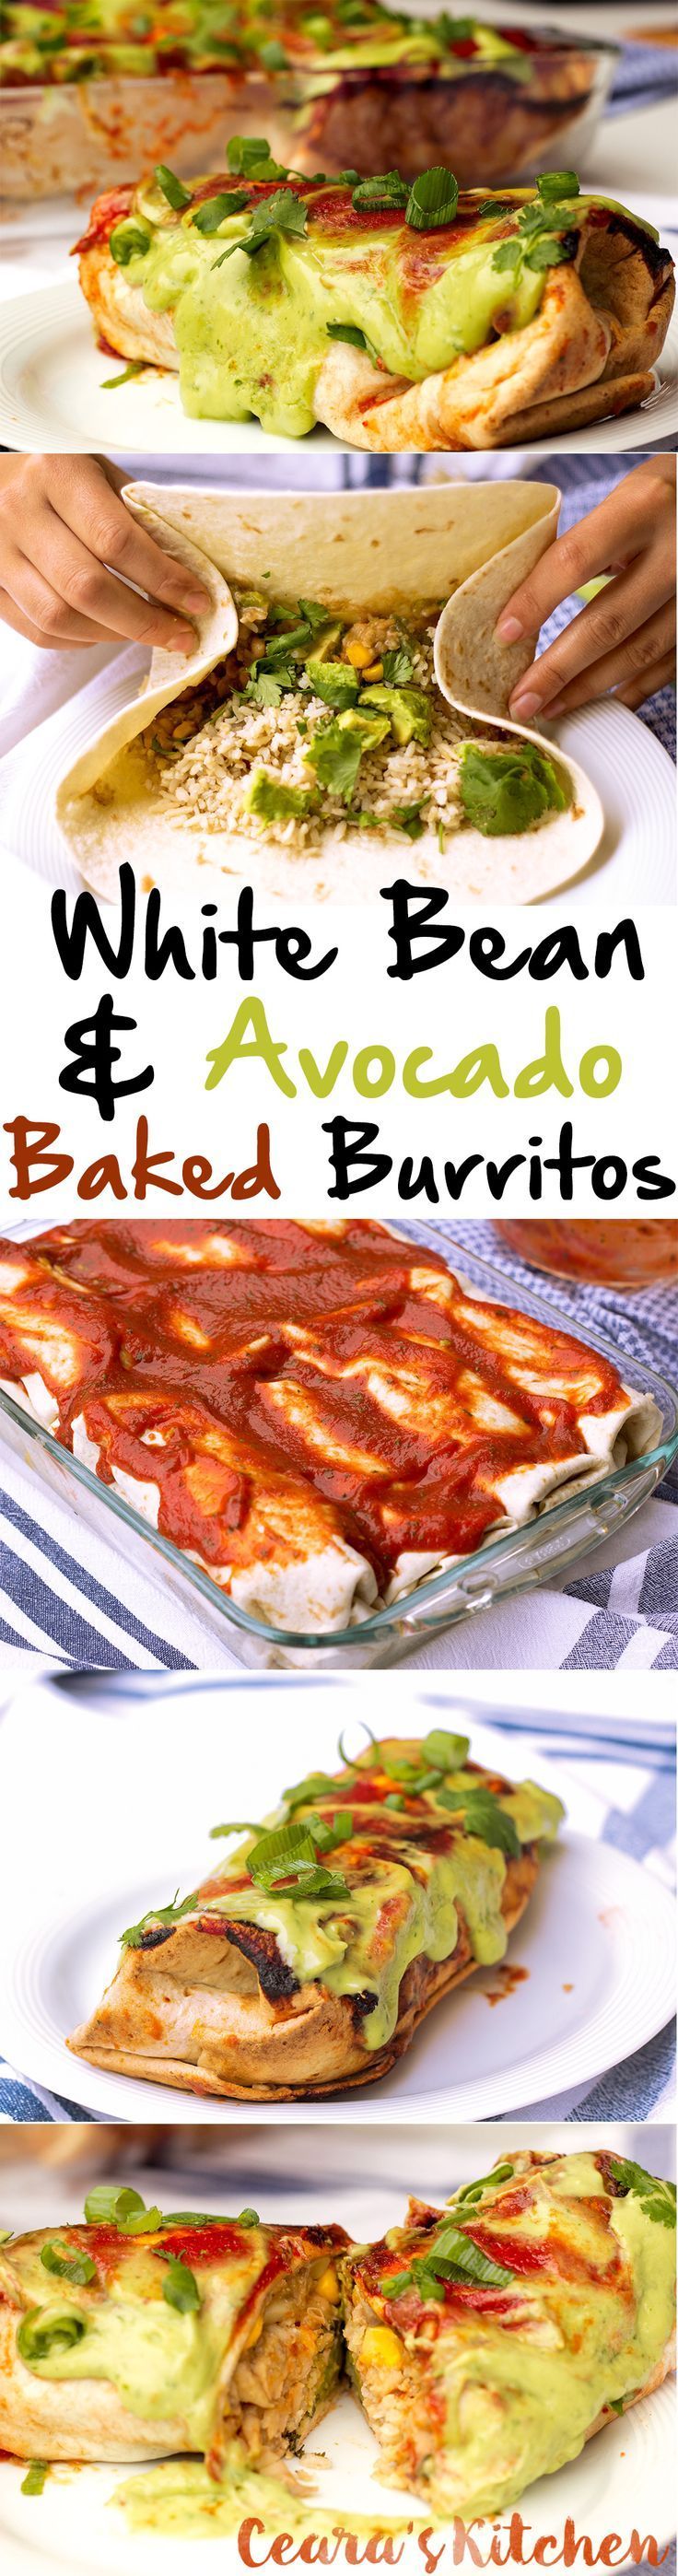 These White Bean and Avocado Baked Burritos make the perfect dinner – stuffed with